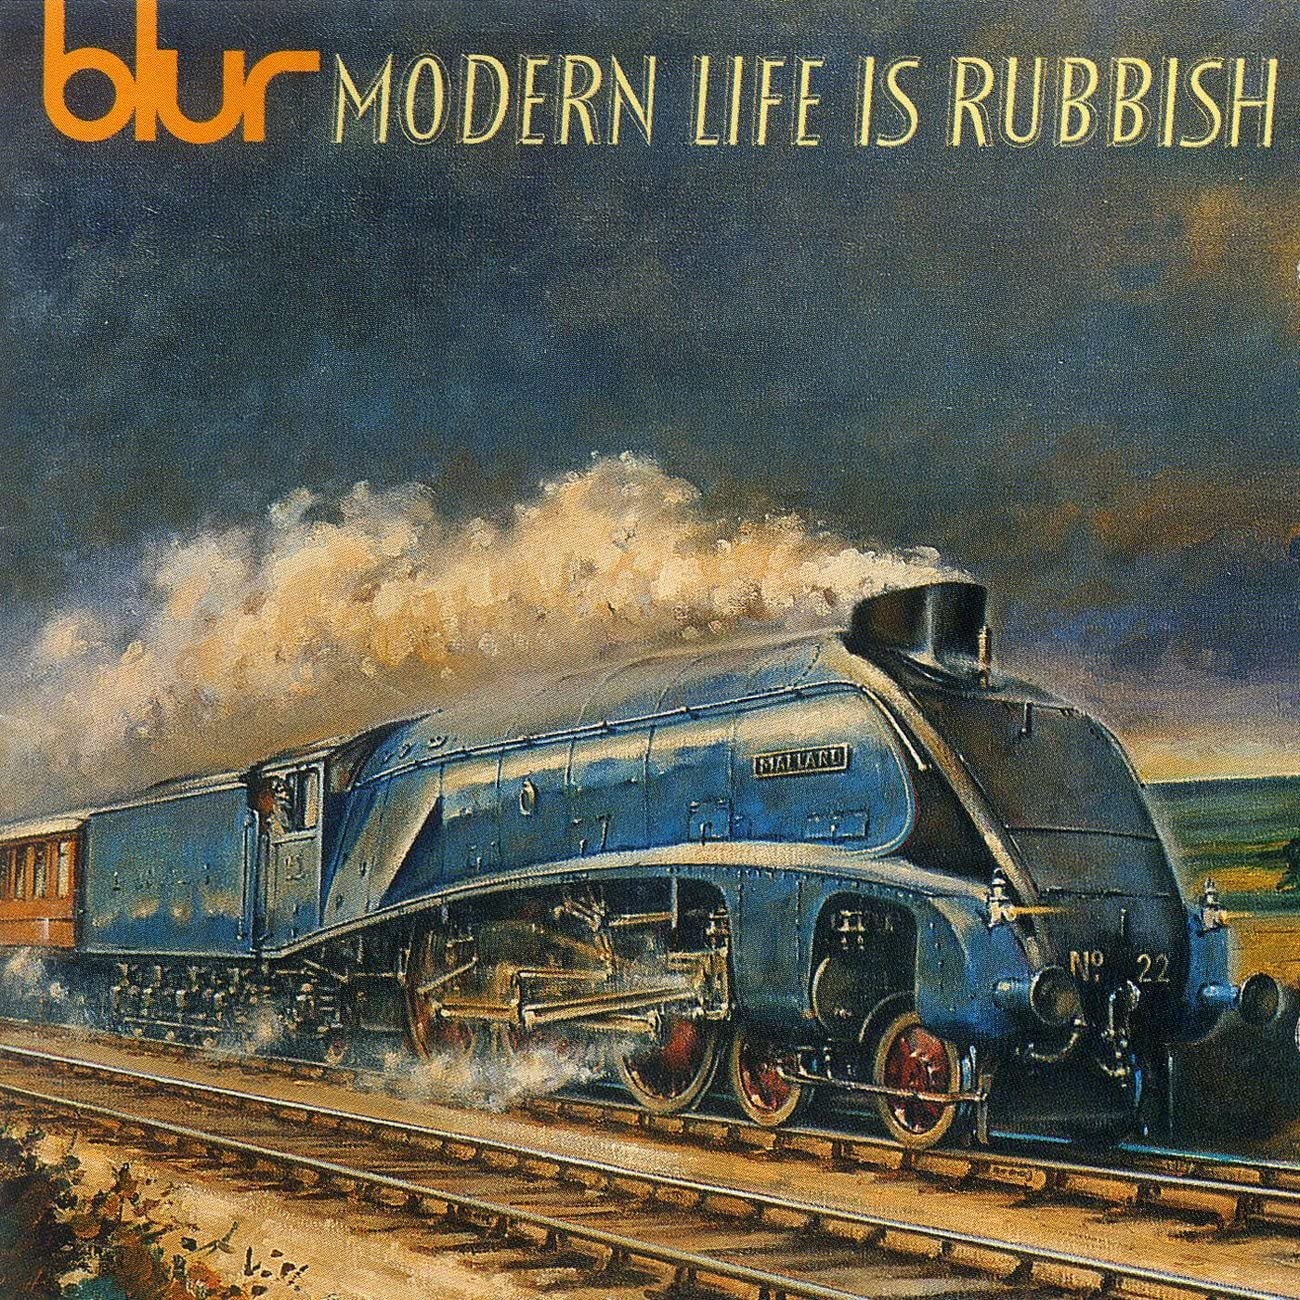 Recorded in 1993, Modern Life is Rubbish was Blur's second album on Vinyl and represented a change in style by the band